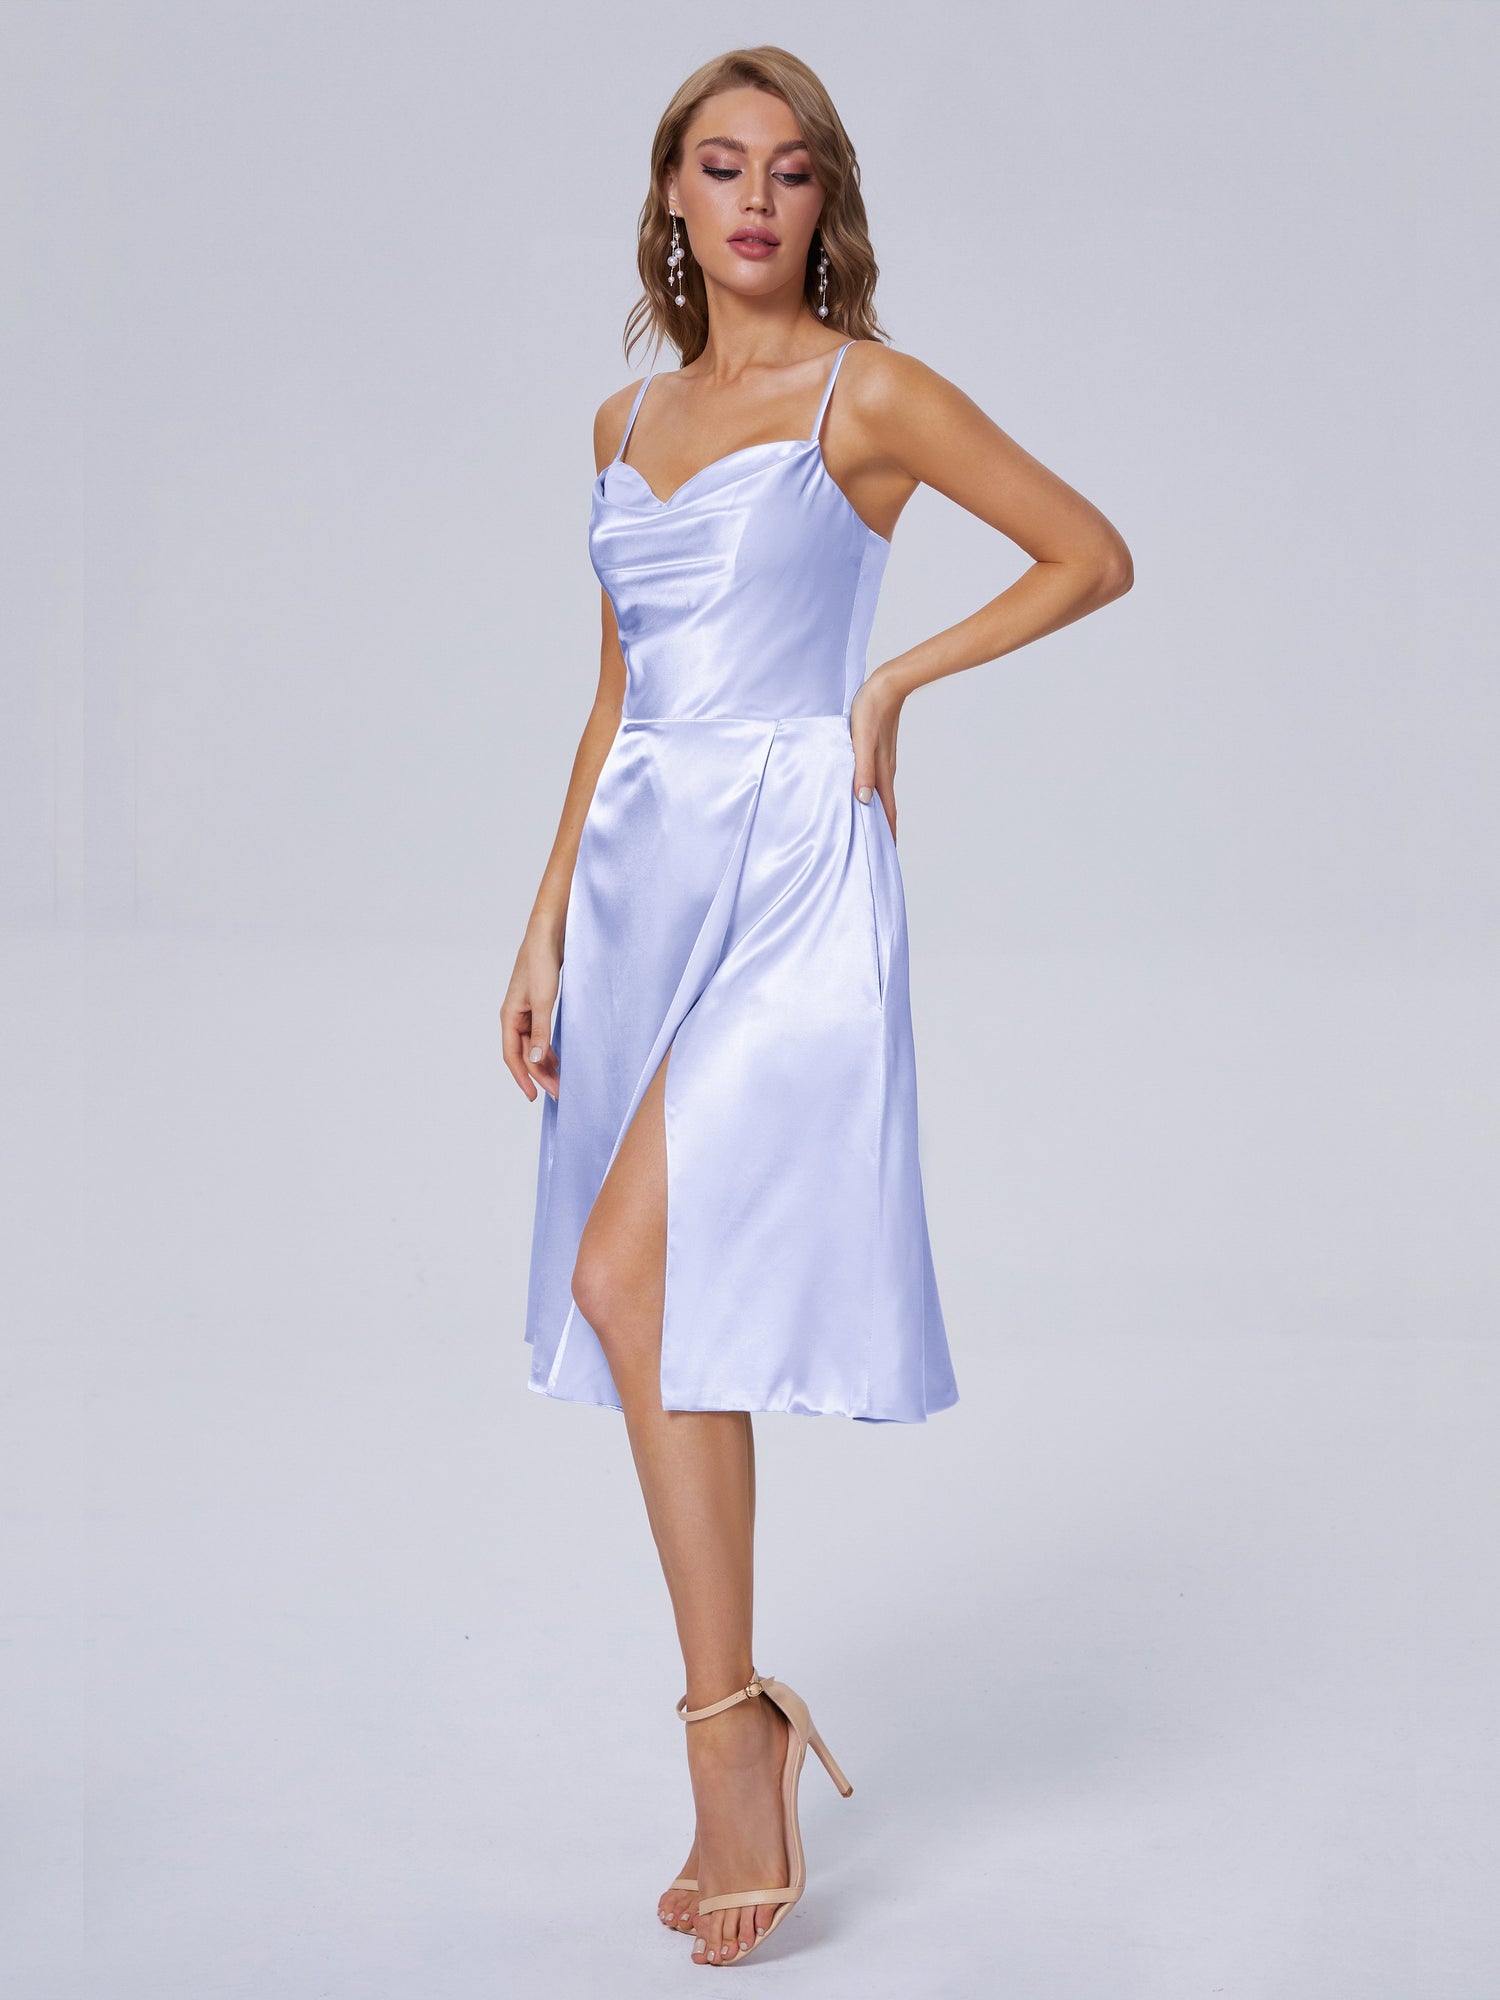 This is You Dress Dreamy For Satin Bridesmaid the Are Looking